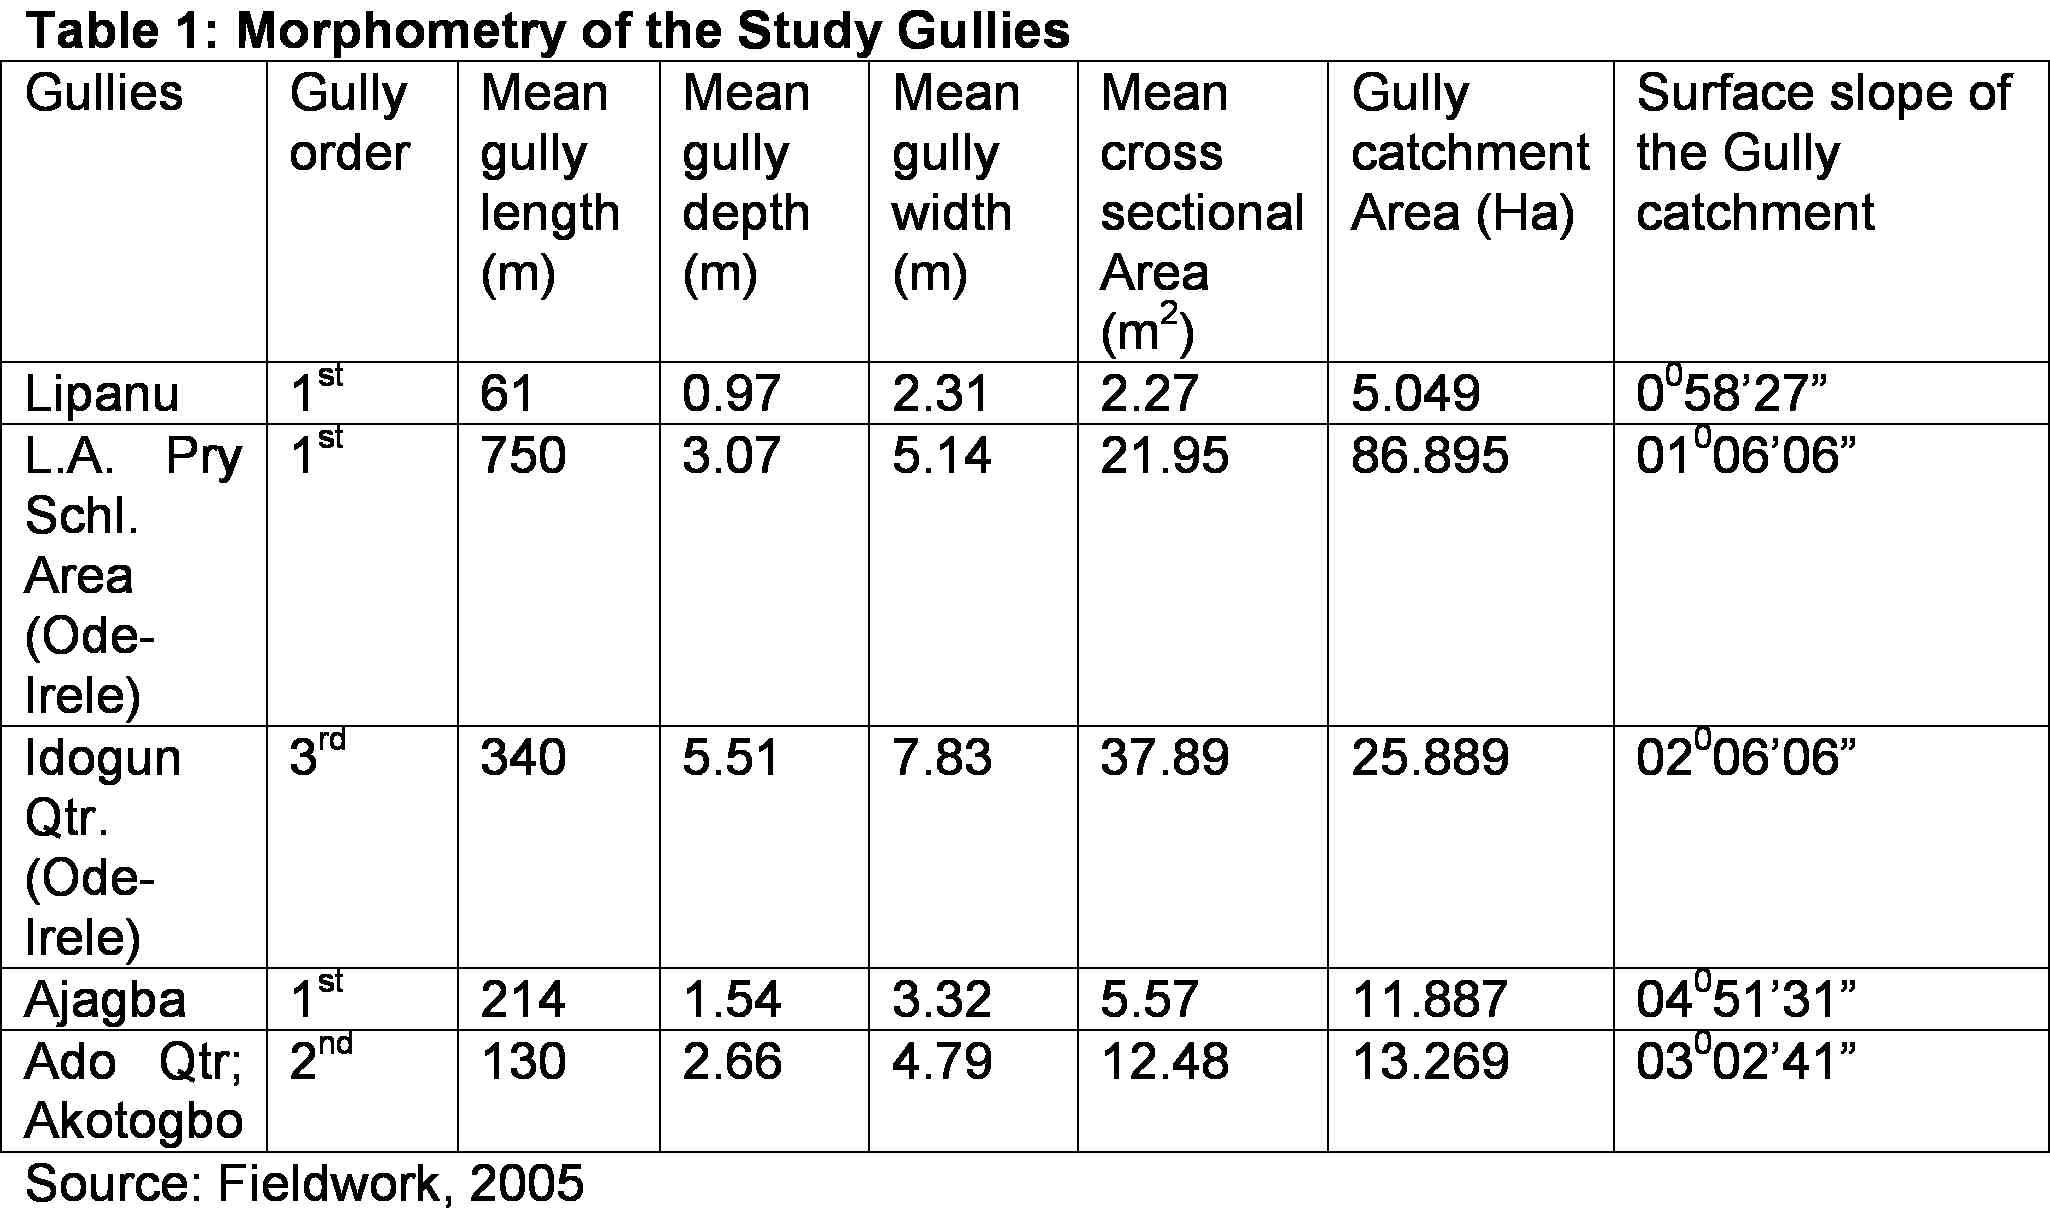 Image of a table showing morphology of study gullies